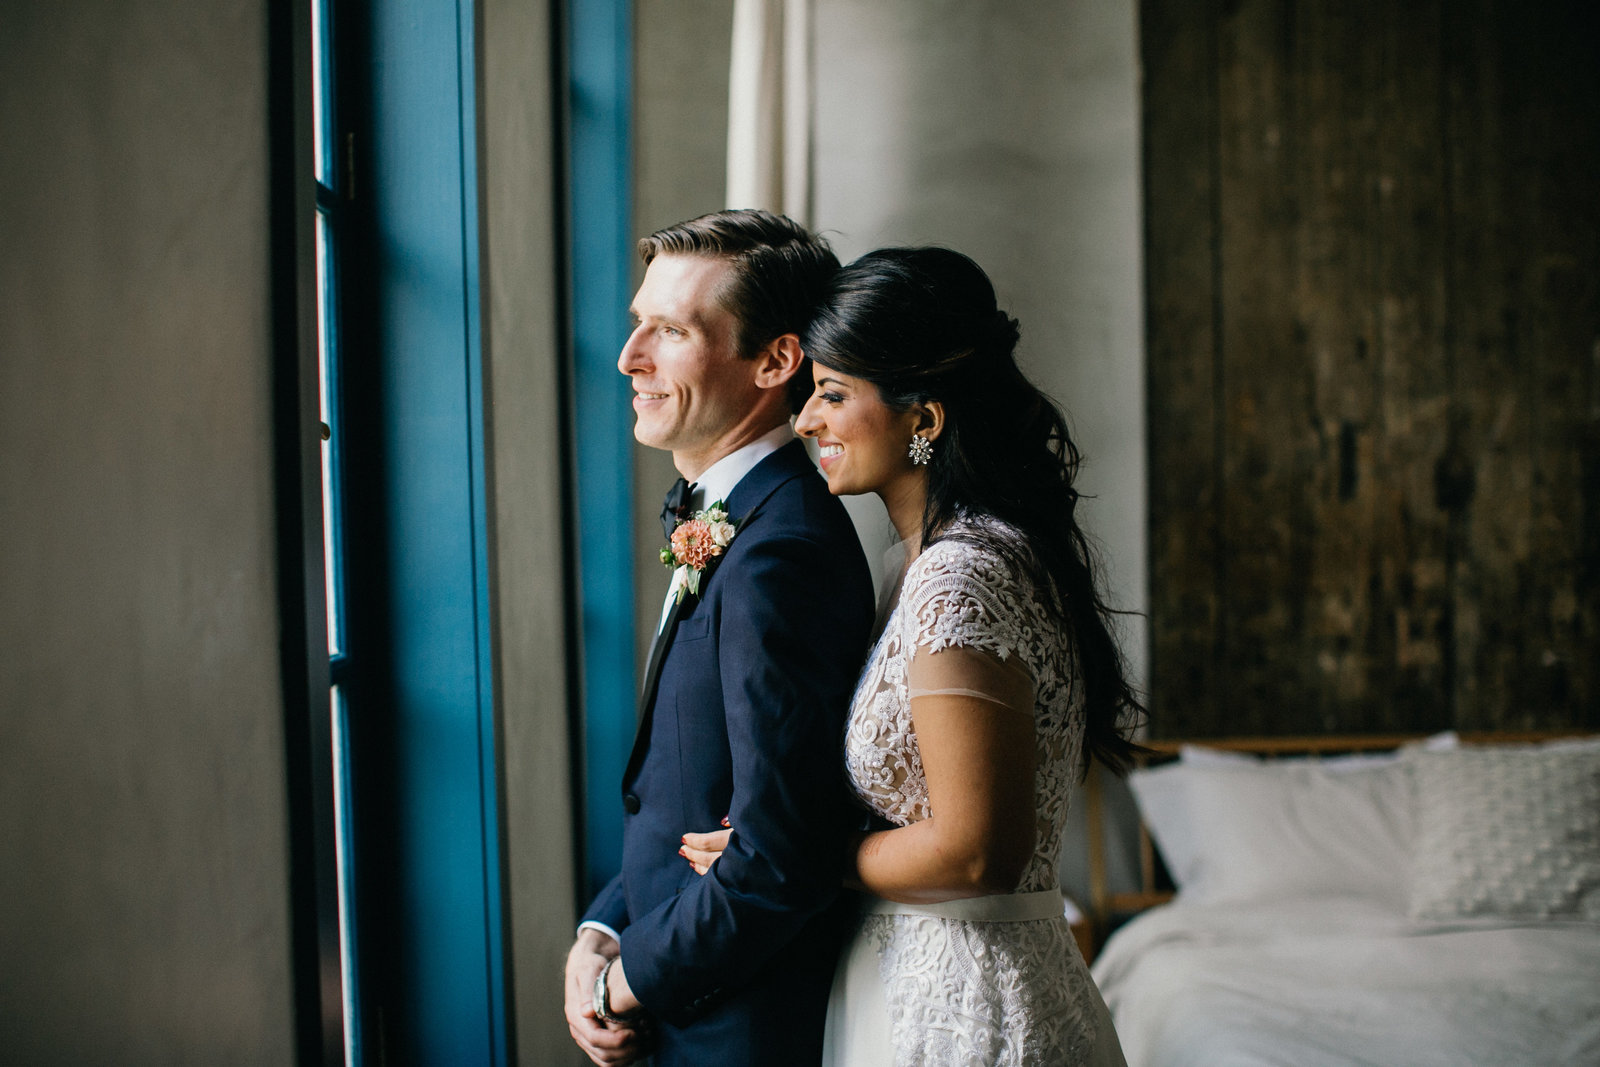 Intimate shot of the bride and groom during the first look at Lokal Hotel in Old City.